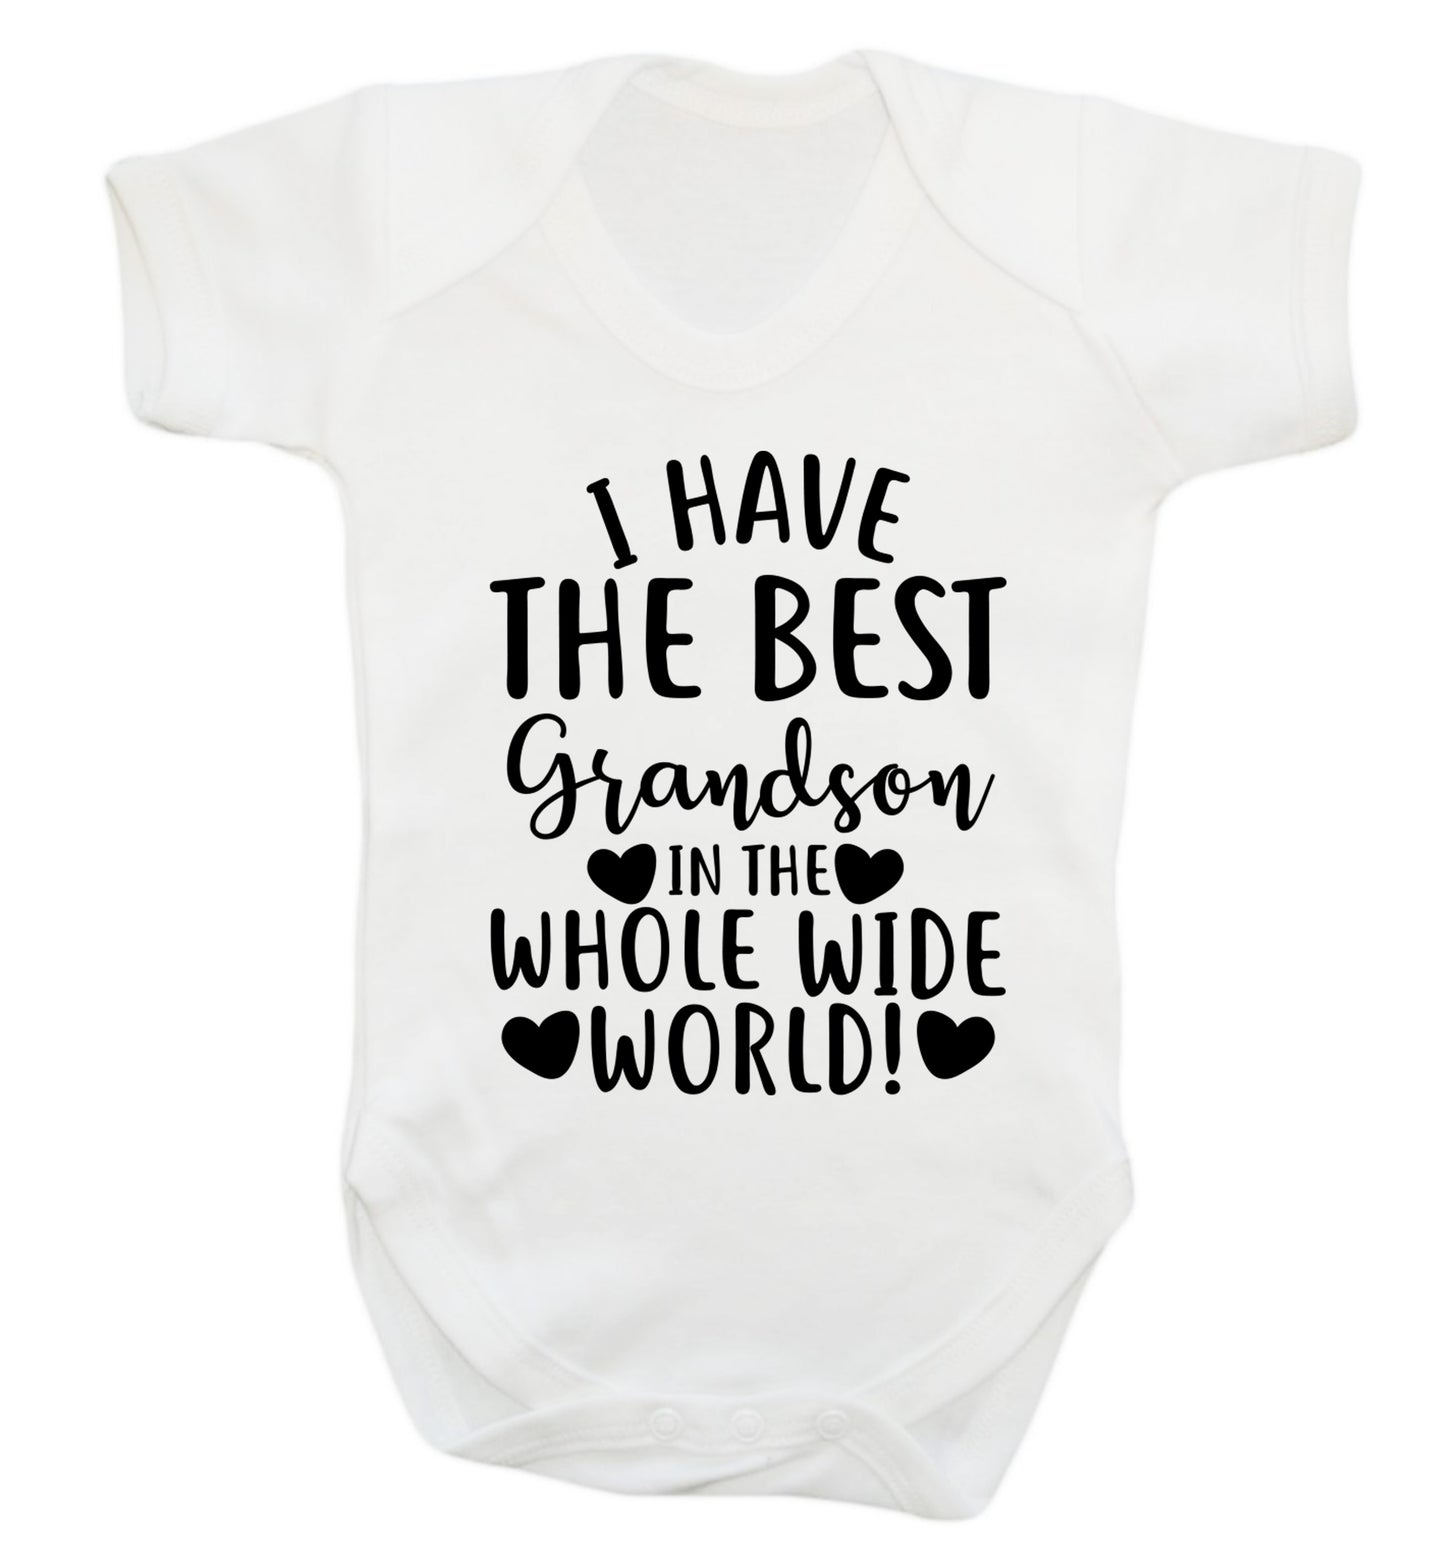 I have the best grandson in the whole wide world! Baby Vest white 18-24 months